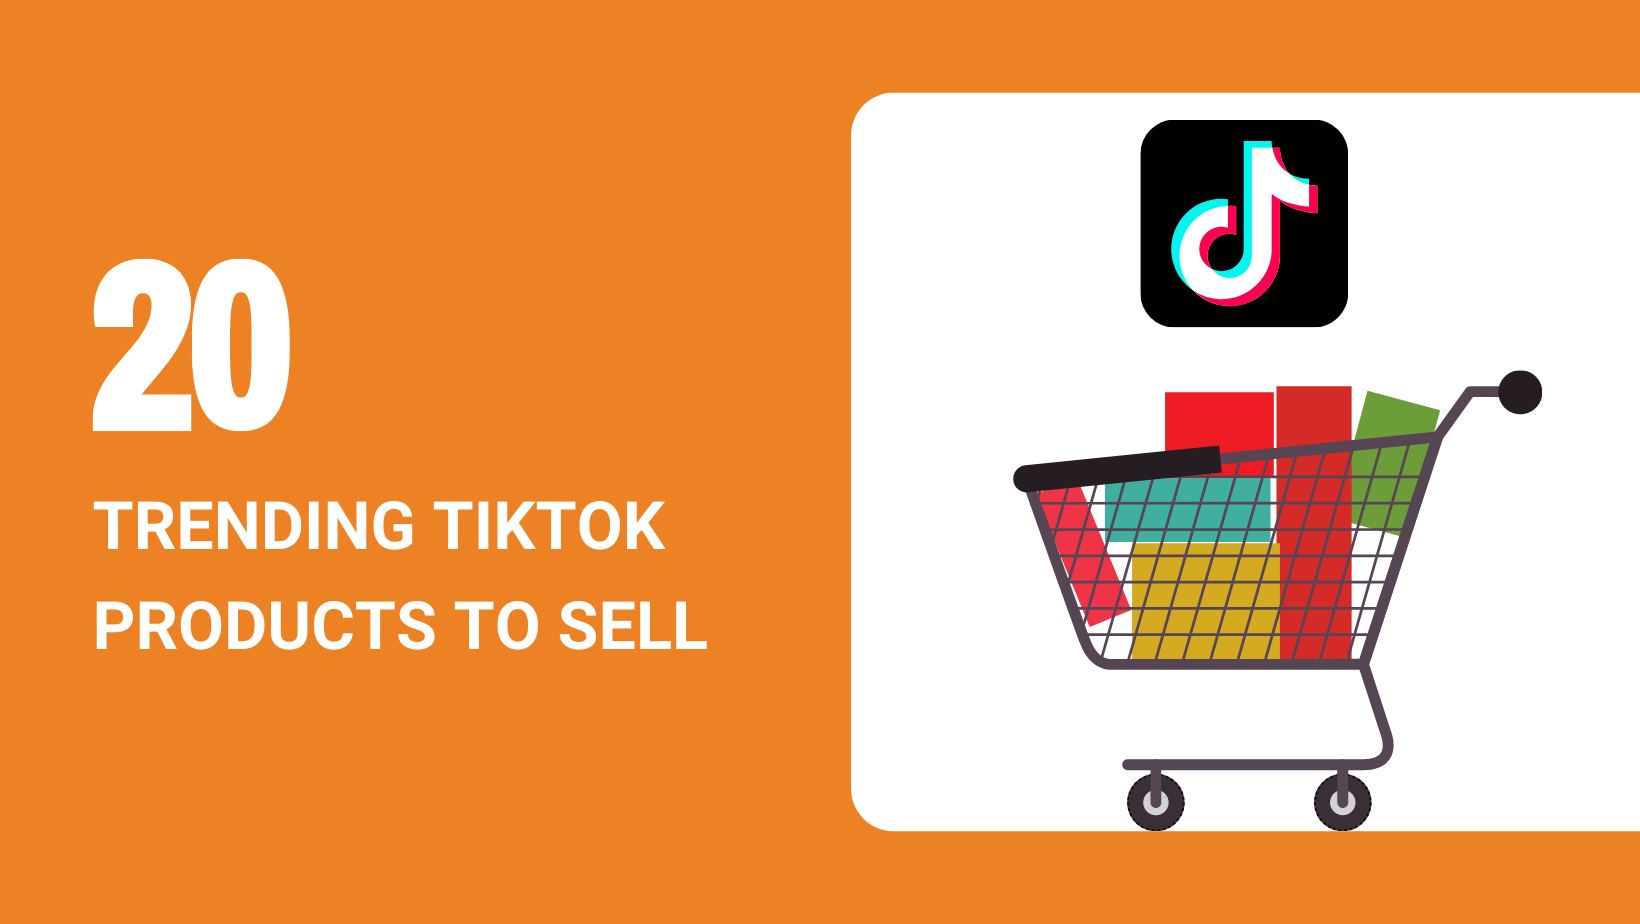 20 TRENDING TIKTOK PRODUCTS TO SELL